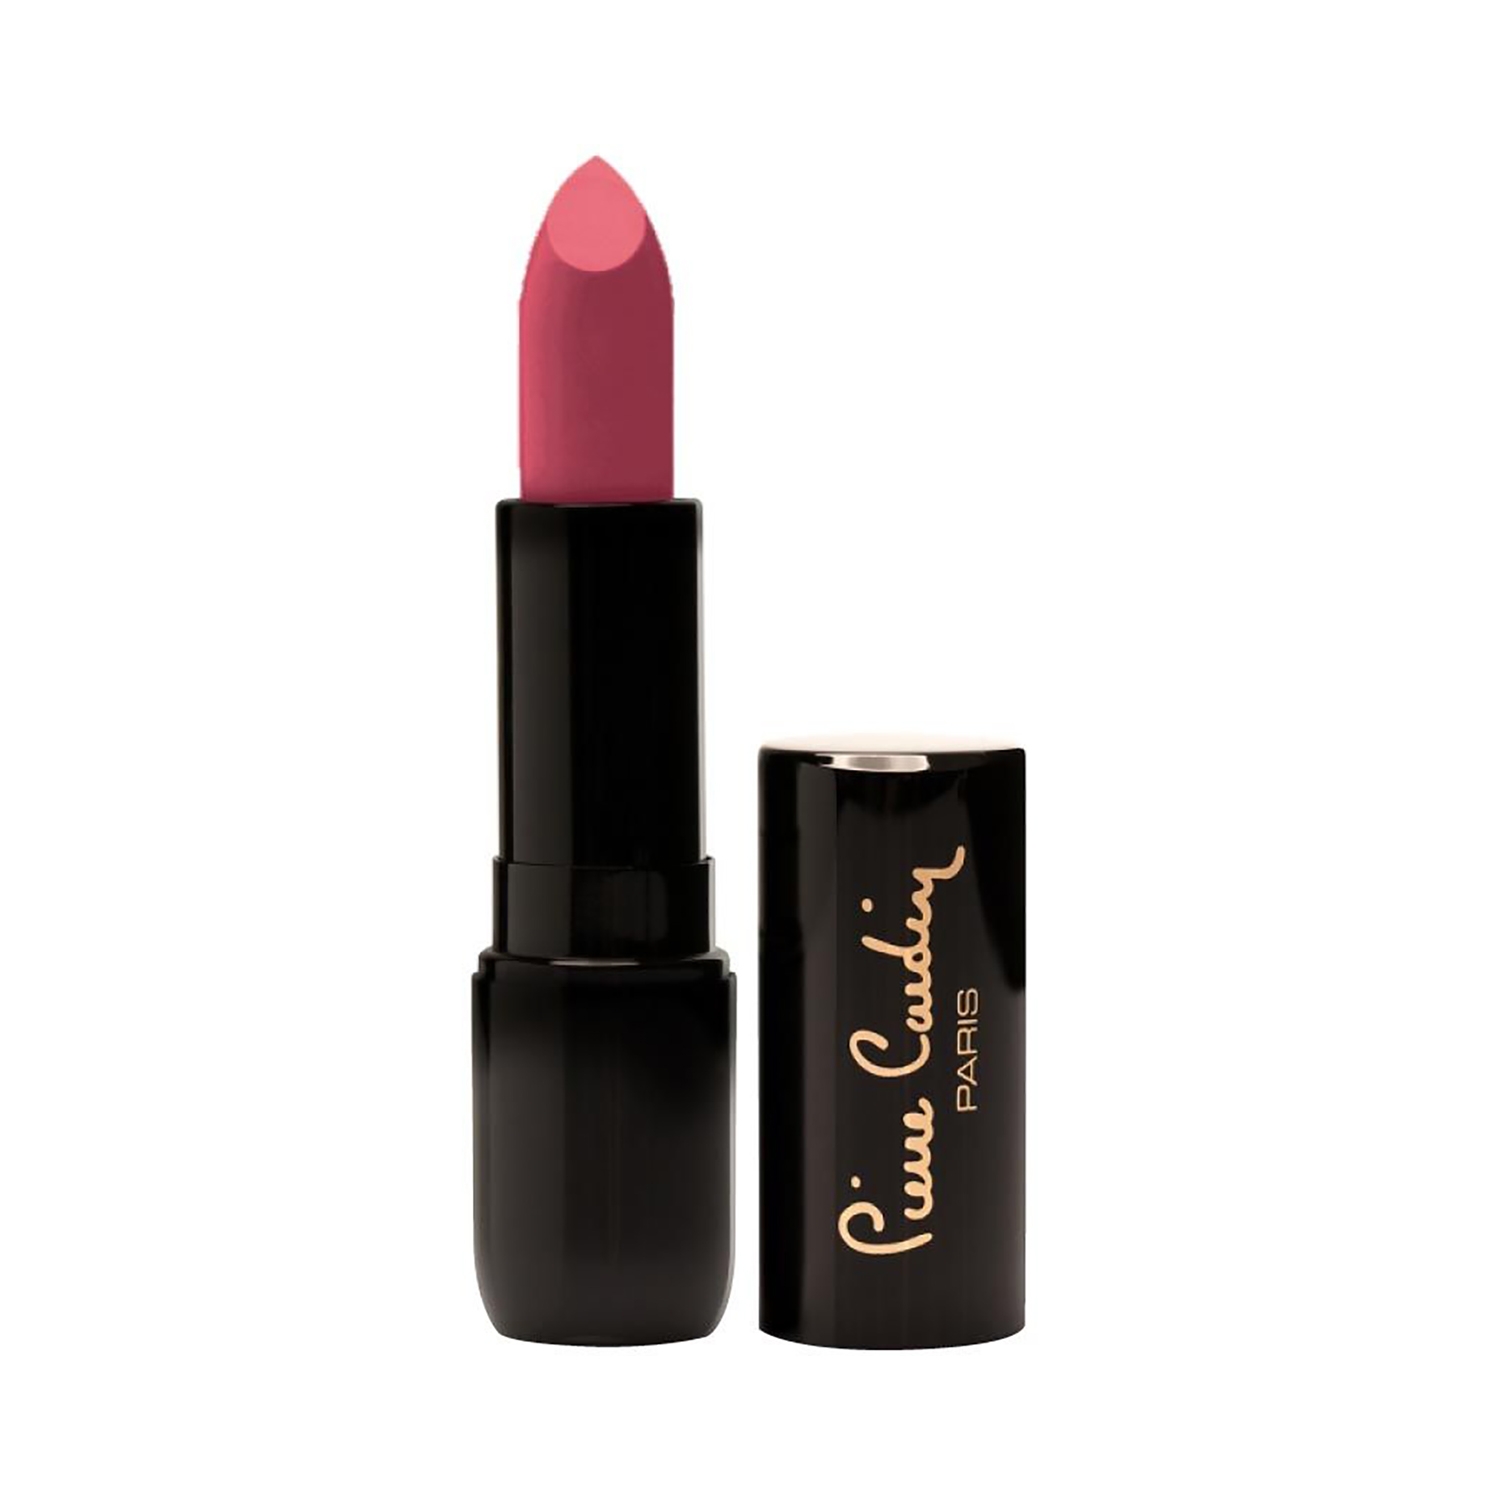 Pierre Cardin Paris | Pierre Cardin Paris Porcelain Edition Rouge Lipstick - 234 Rustic Pink (4g)